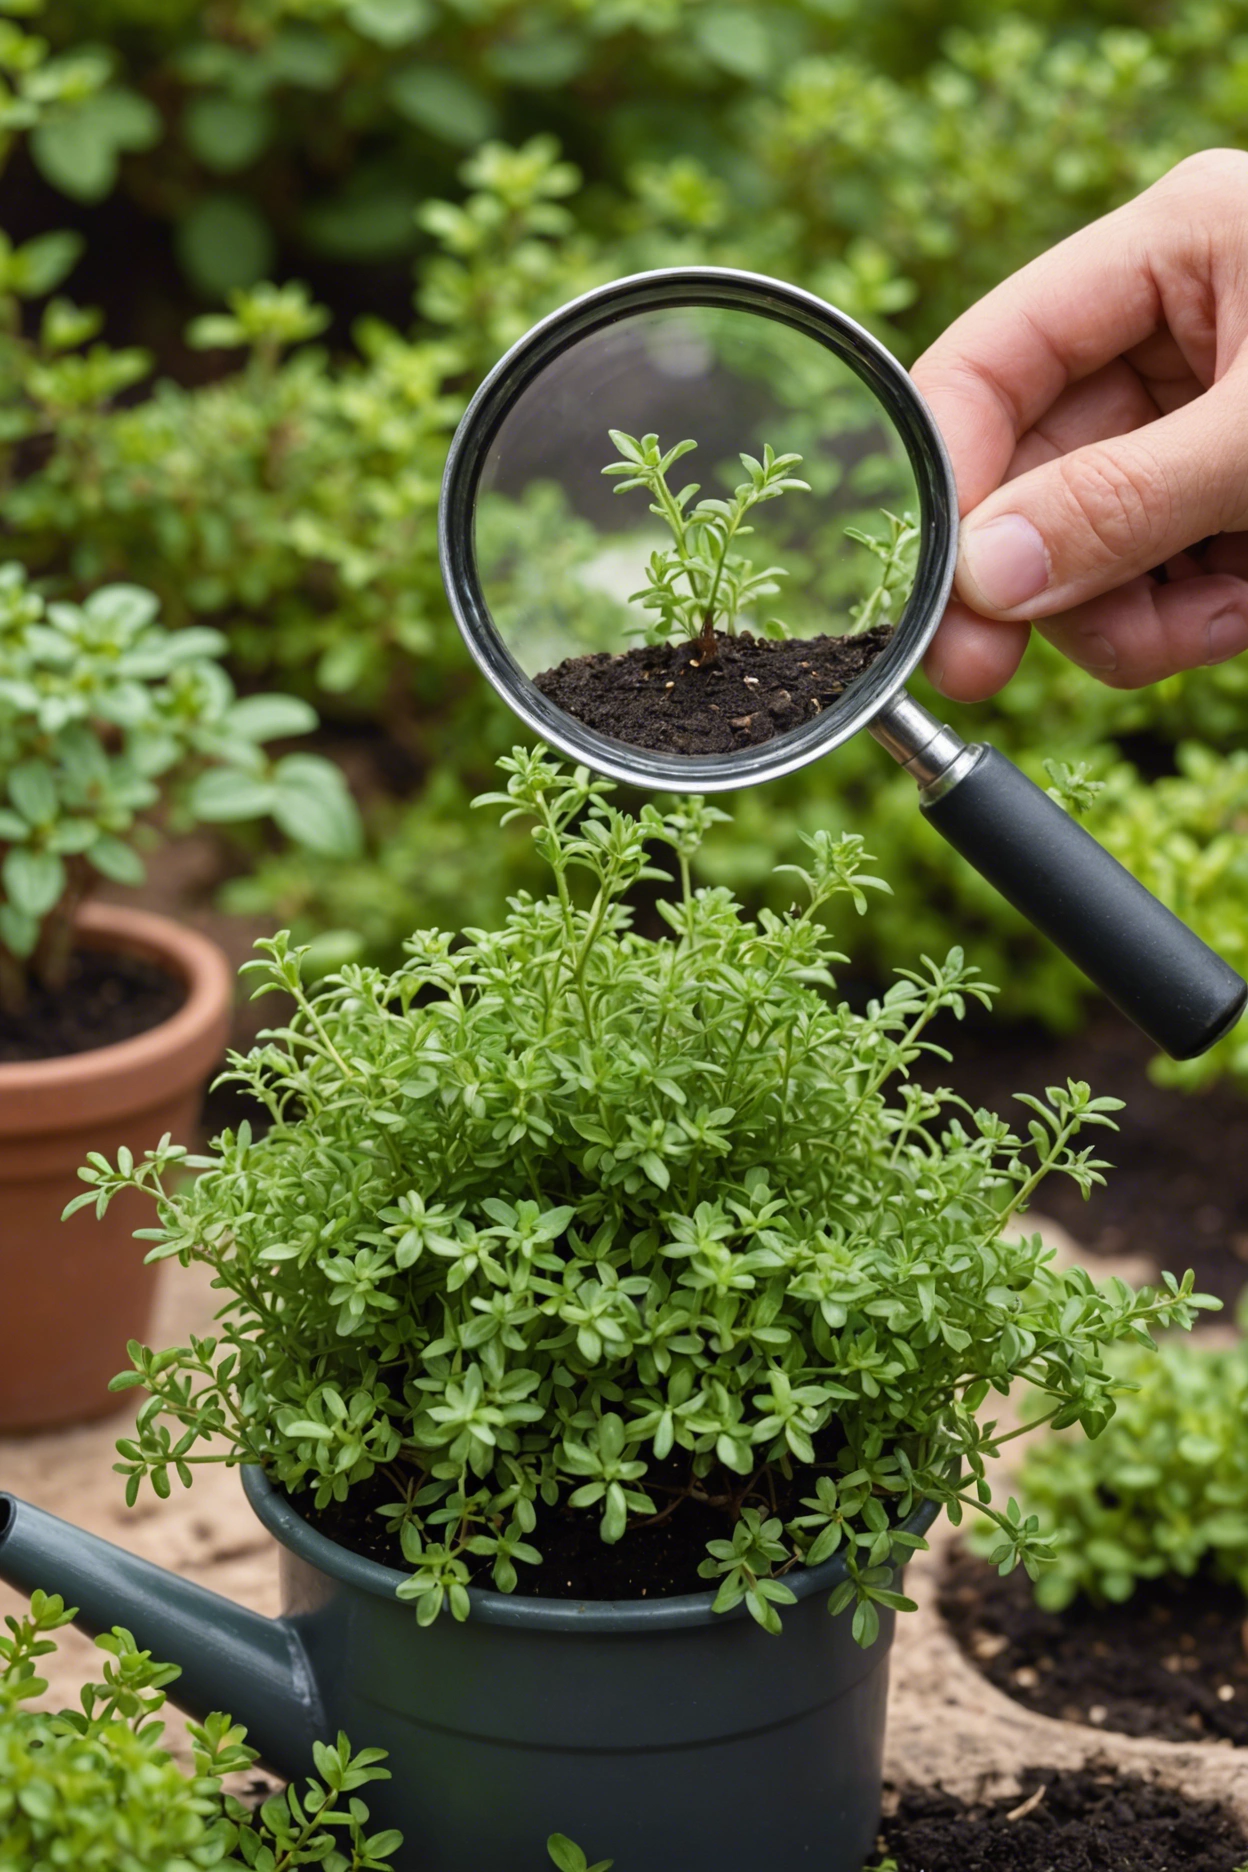 "Close-up of a wilting thyme plant in a garden, with a magnifying glass diagnosing its condition, and gardening tools in the background."